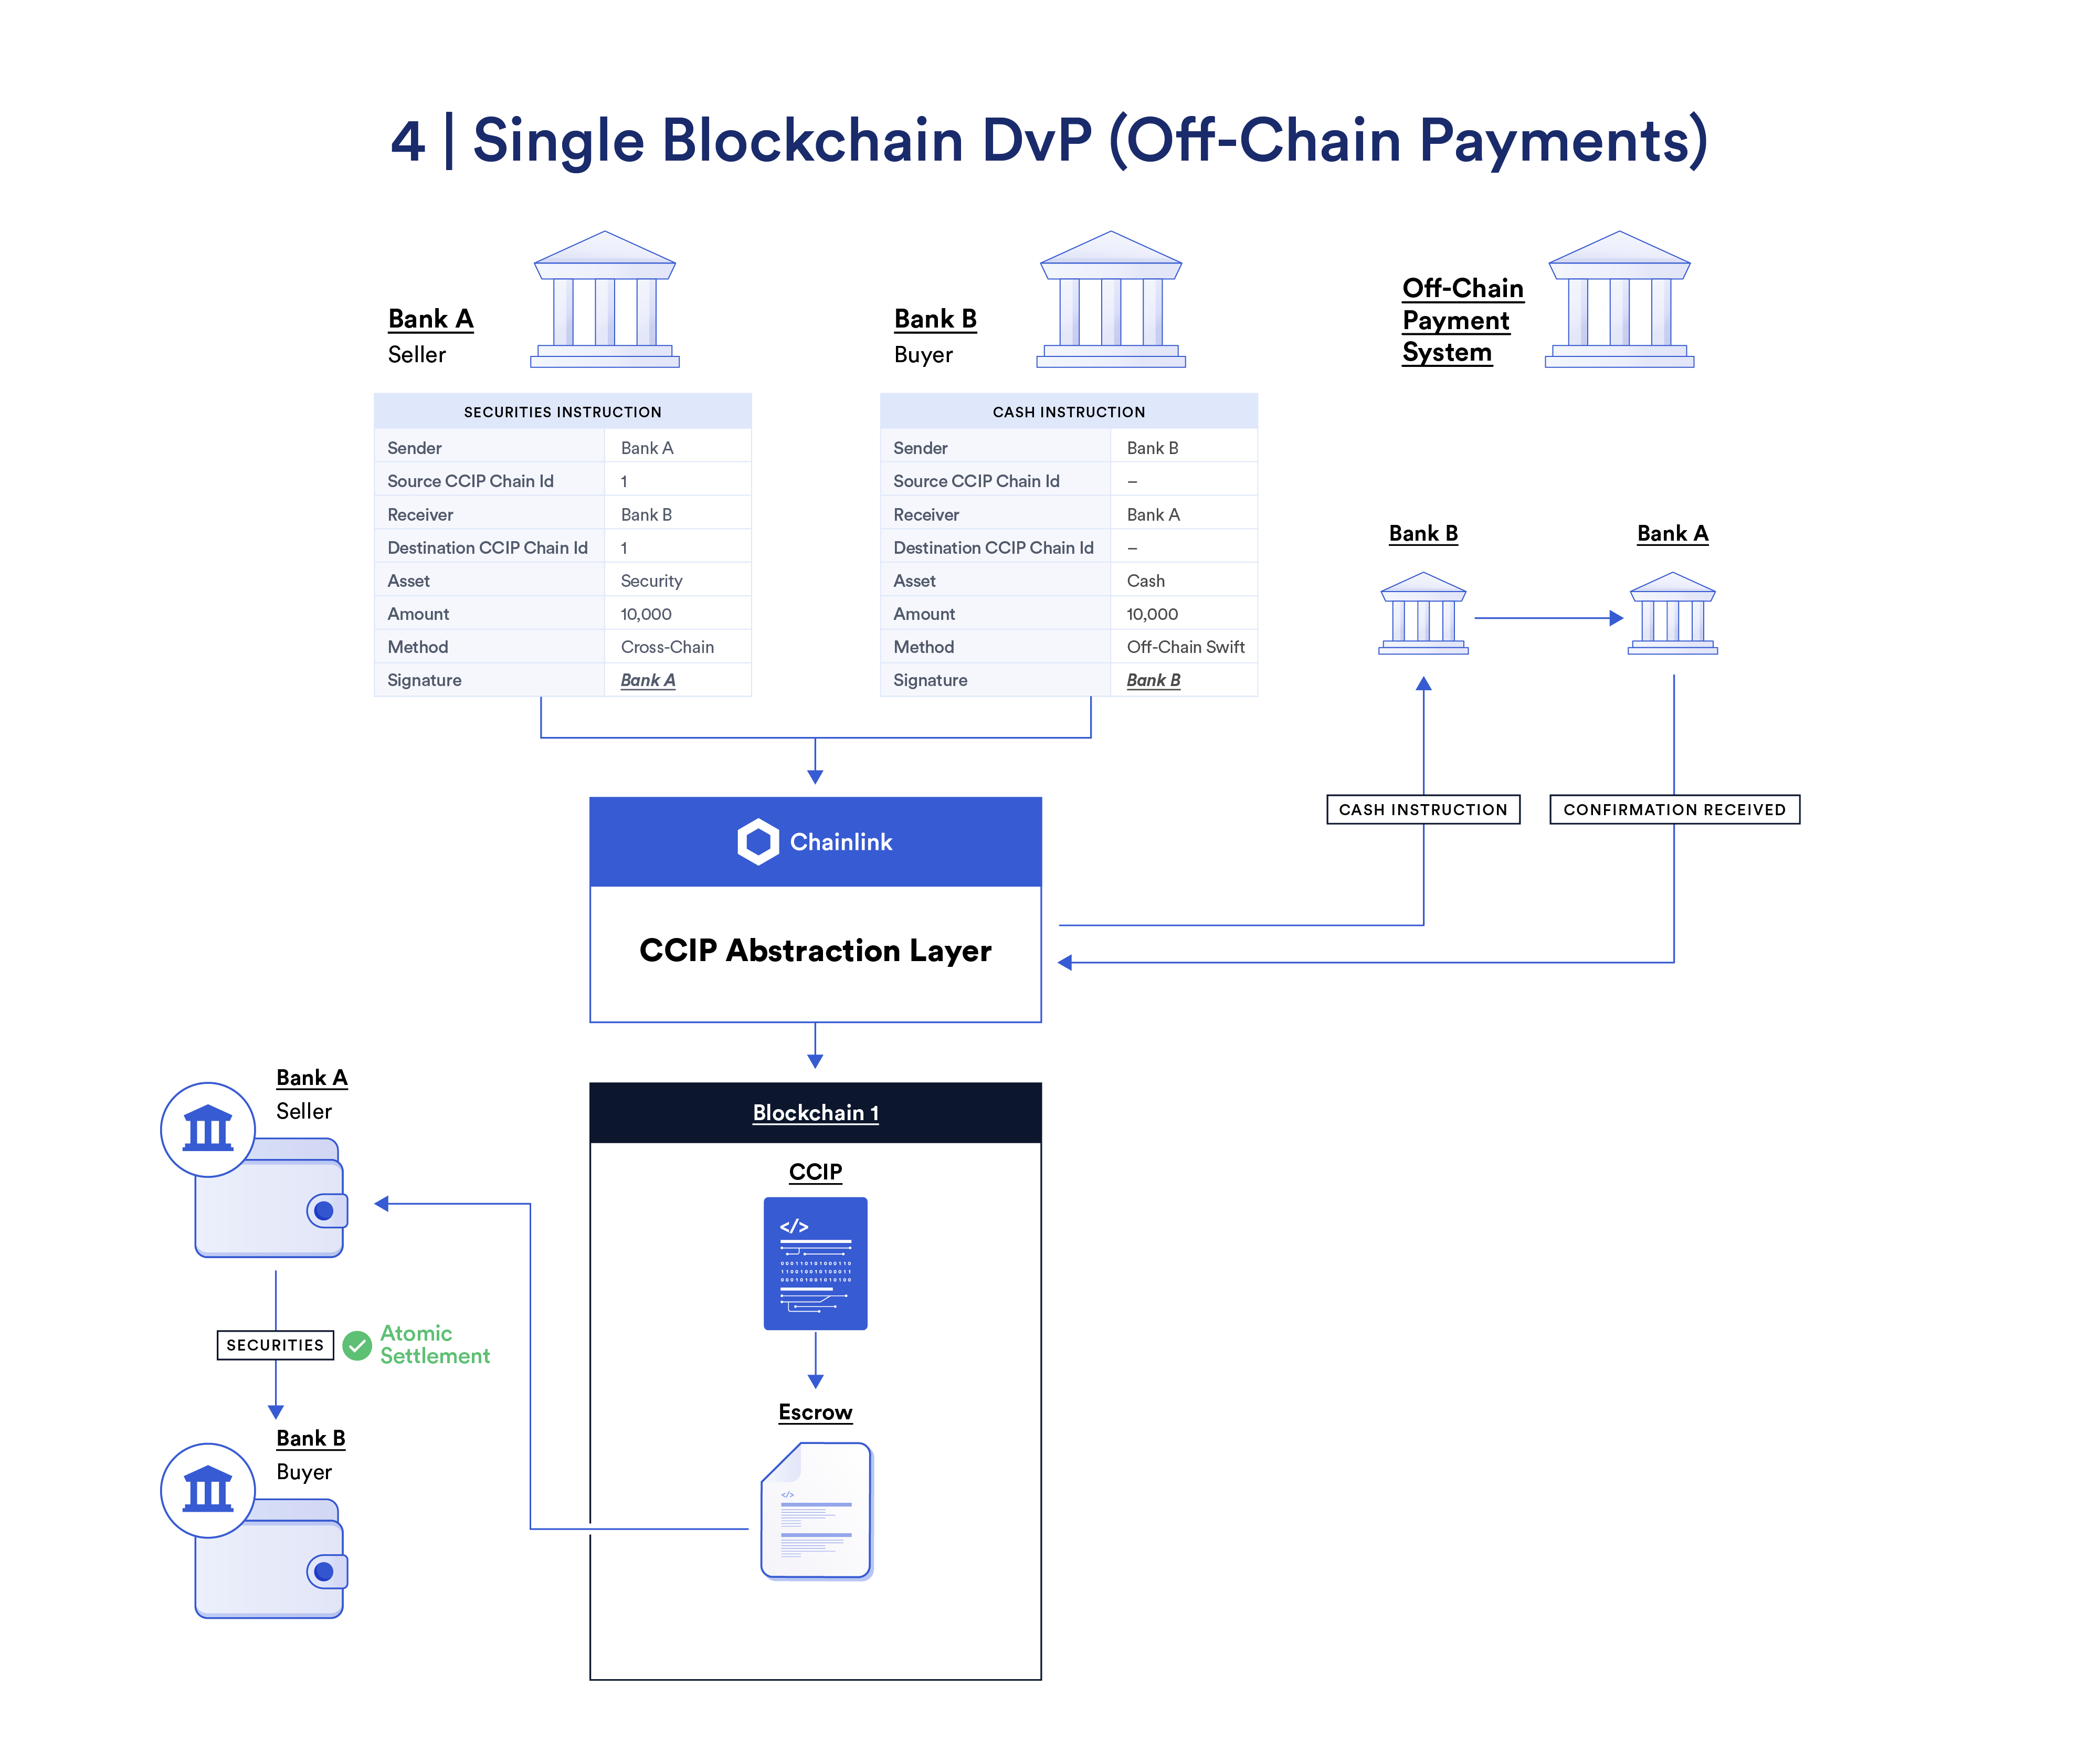 Single blockchain DvP with an off-chain payment.